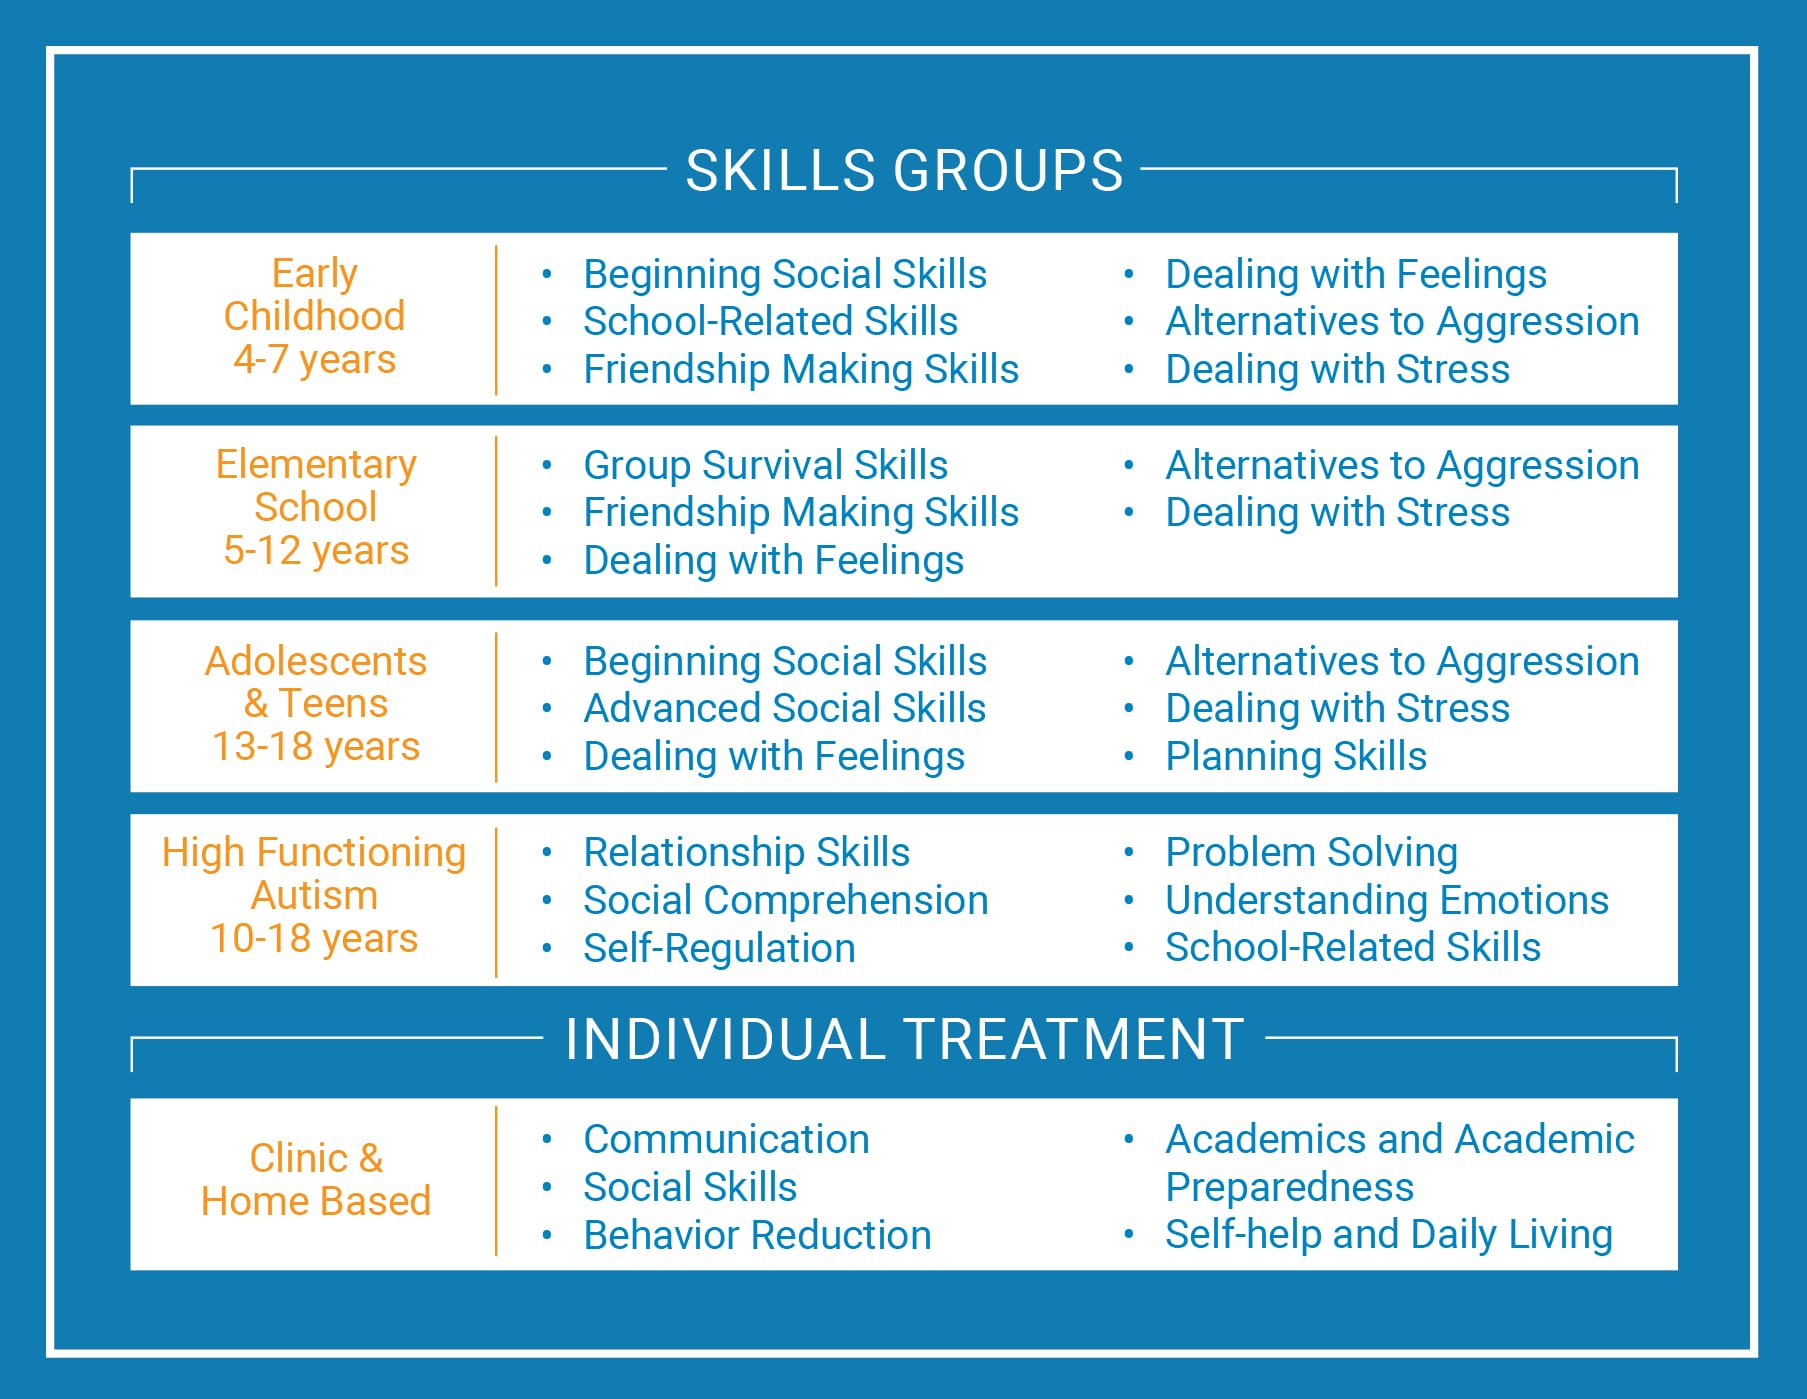 A chart that includes the following information. Skills Groups: Early Childhood 4-7 years. Beginning social skills, school-related skills, friendship making skills, dealing with feelings, alternatives to aggression, dealing with stress. Elementary school 5-12 years. Group survival skills, friendship making skills, dealing with feelings, alternatives to aggression, dealing with stress. Adolescents and teens 13-18 years. Beginning social skills, advanced social skills, dealing with feelings, alternatives to aggression, dealing with stress, planning skills. High functioning autism 10-18 years. Relationship skills, social comprehension, self-regulation, problem solving, understanding emotions, school-related skills. Individual Treatment: Clinic and Home Based. Communication, social skills, behavior reduction, academics and academic preparedness, self-help and daily living.